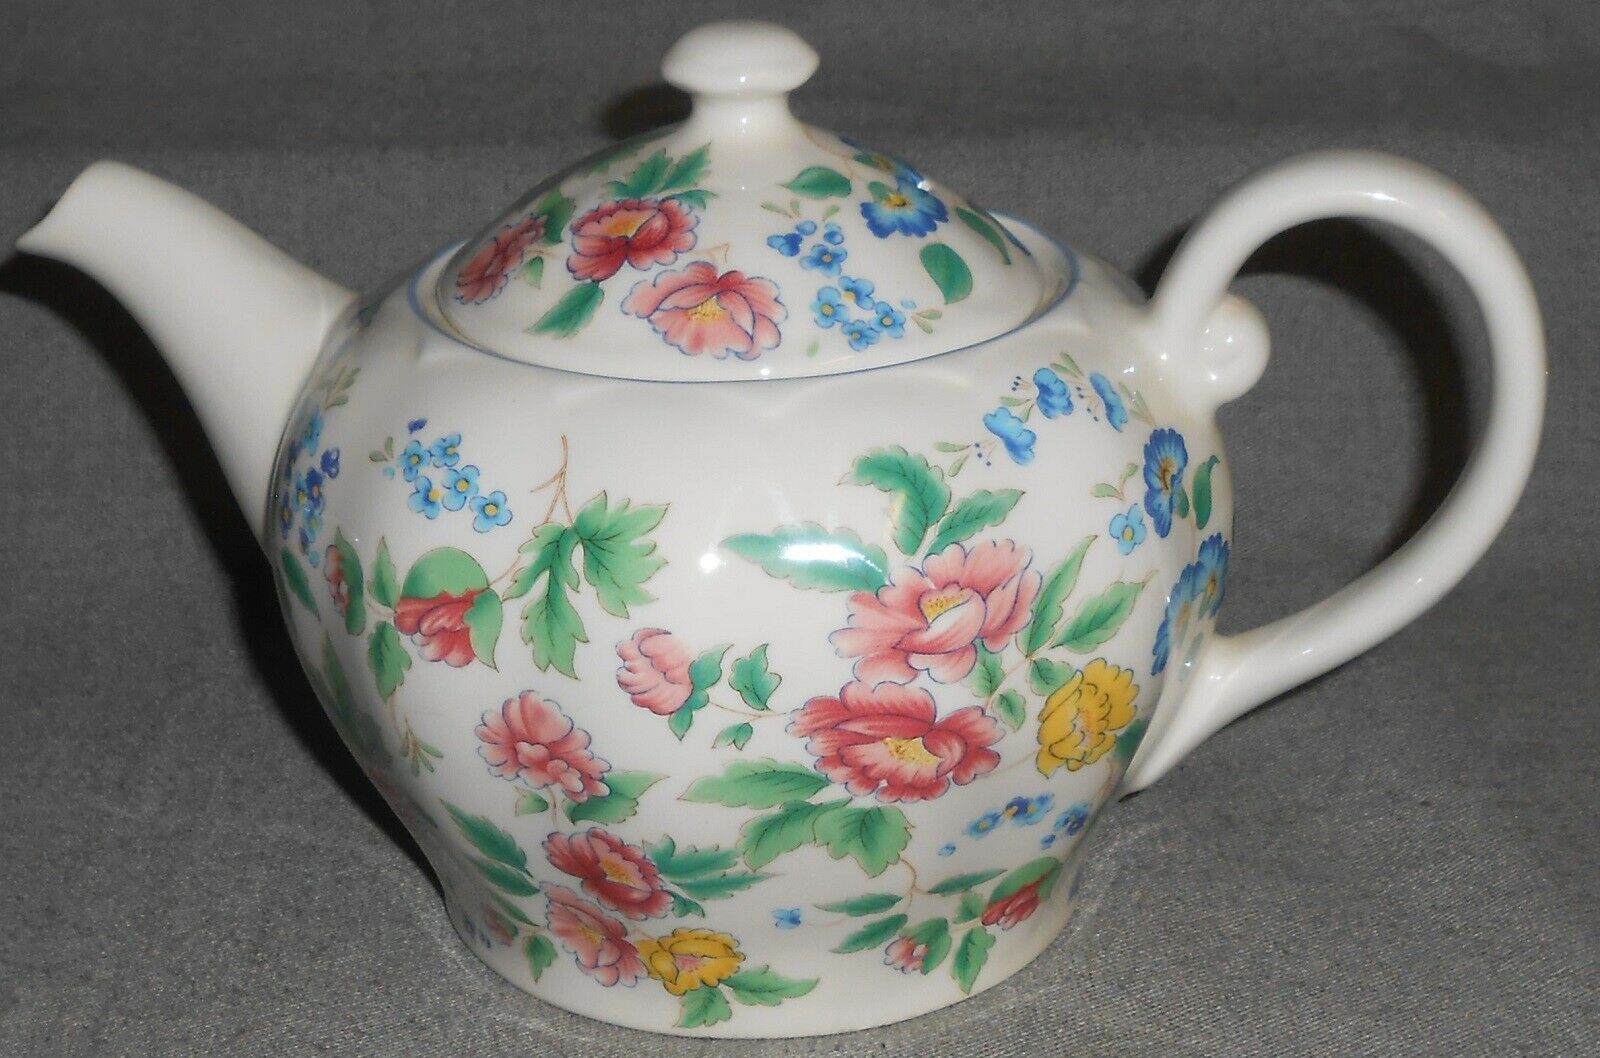 Primary image for Laura Ashley HAZELBURY PATTERN Teapot MADE IN STAFFORDSHIRE - ENGLAND